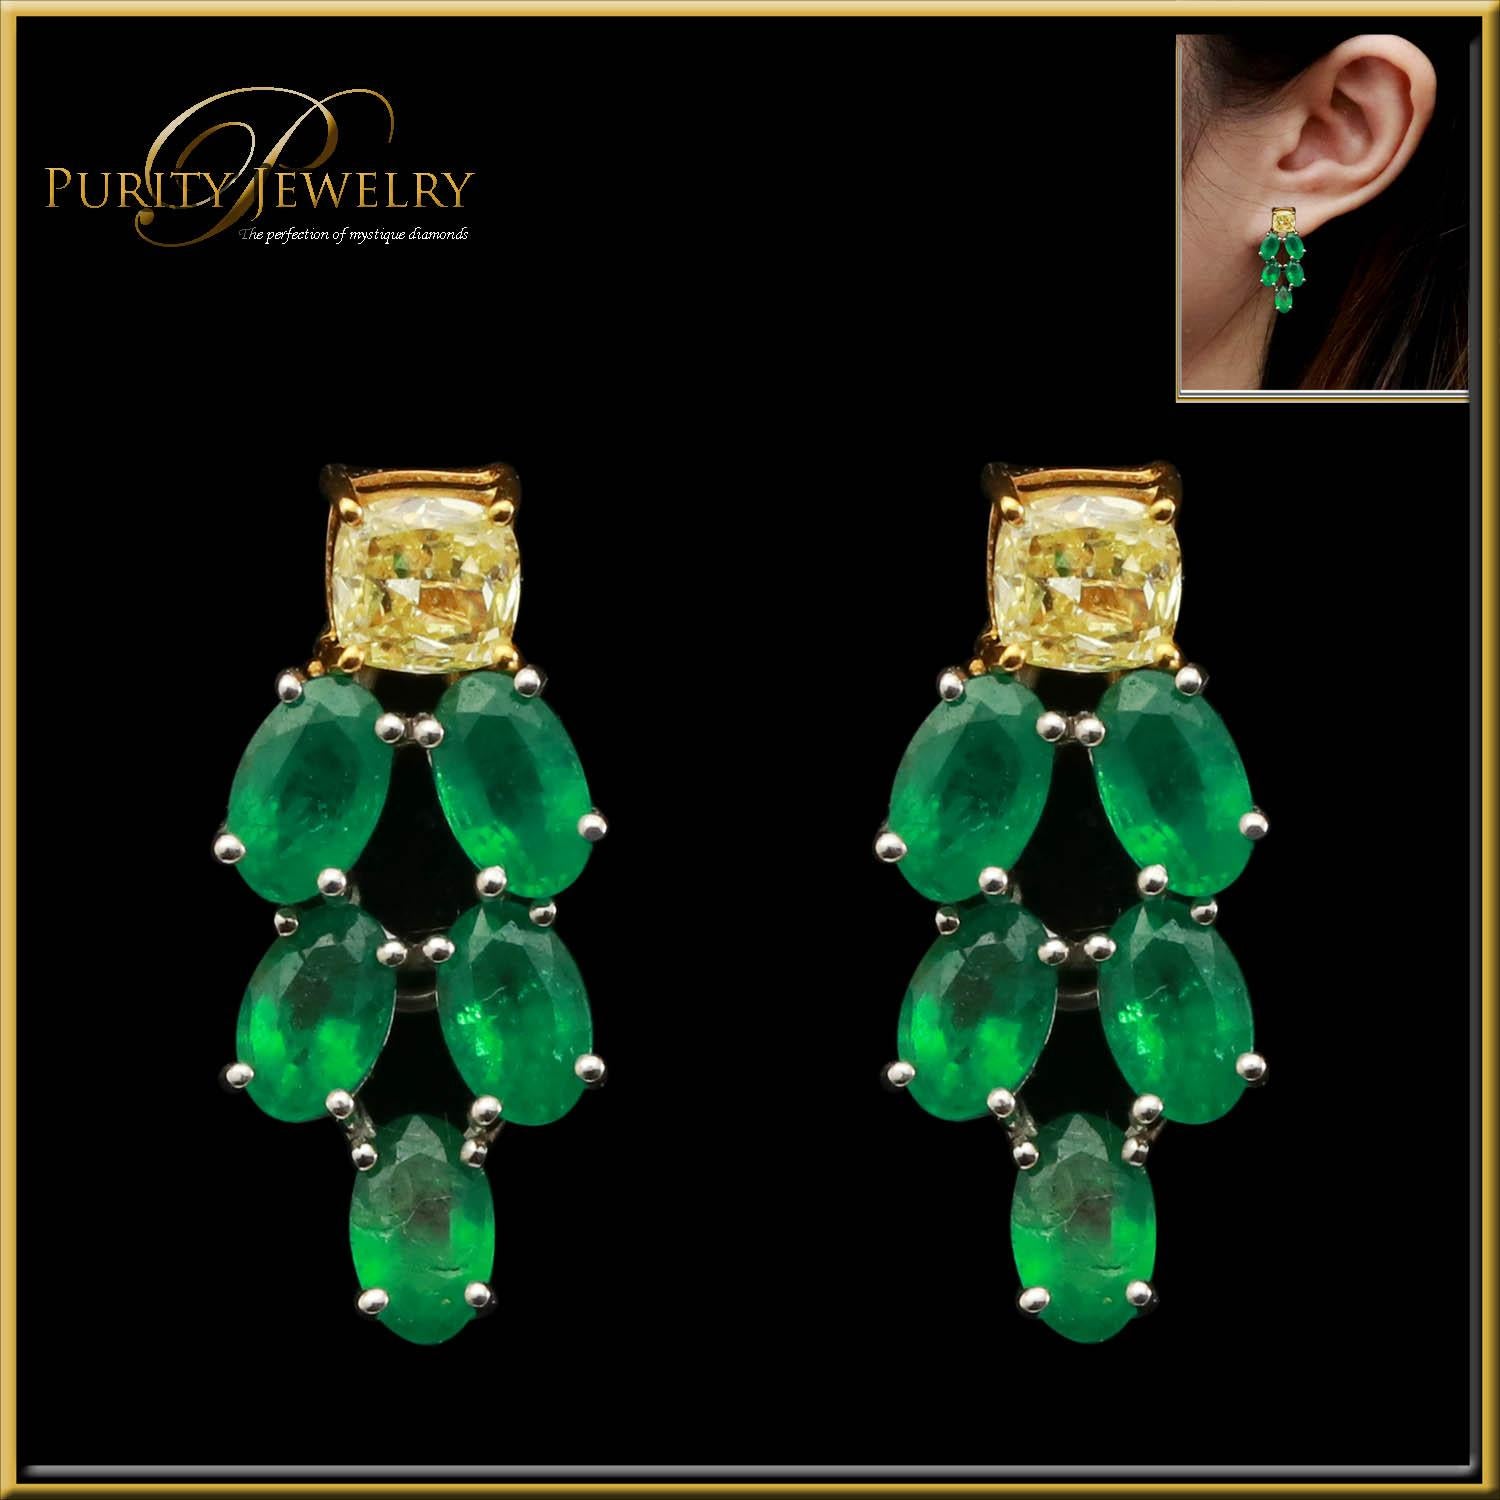 Yellow Diamond and Emeralds Earring in a chandelier style.
The combination of yellow diamonds and emeralds creates a beautiful contrast.
The piece is crafted in - house by our master craftsmen in Thailand. 
The Diamond Quality is G/H VS - SI. The